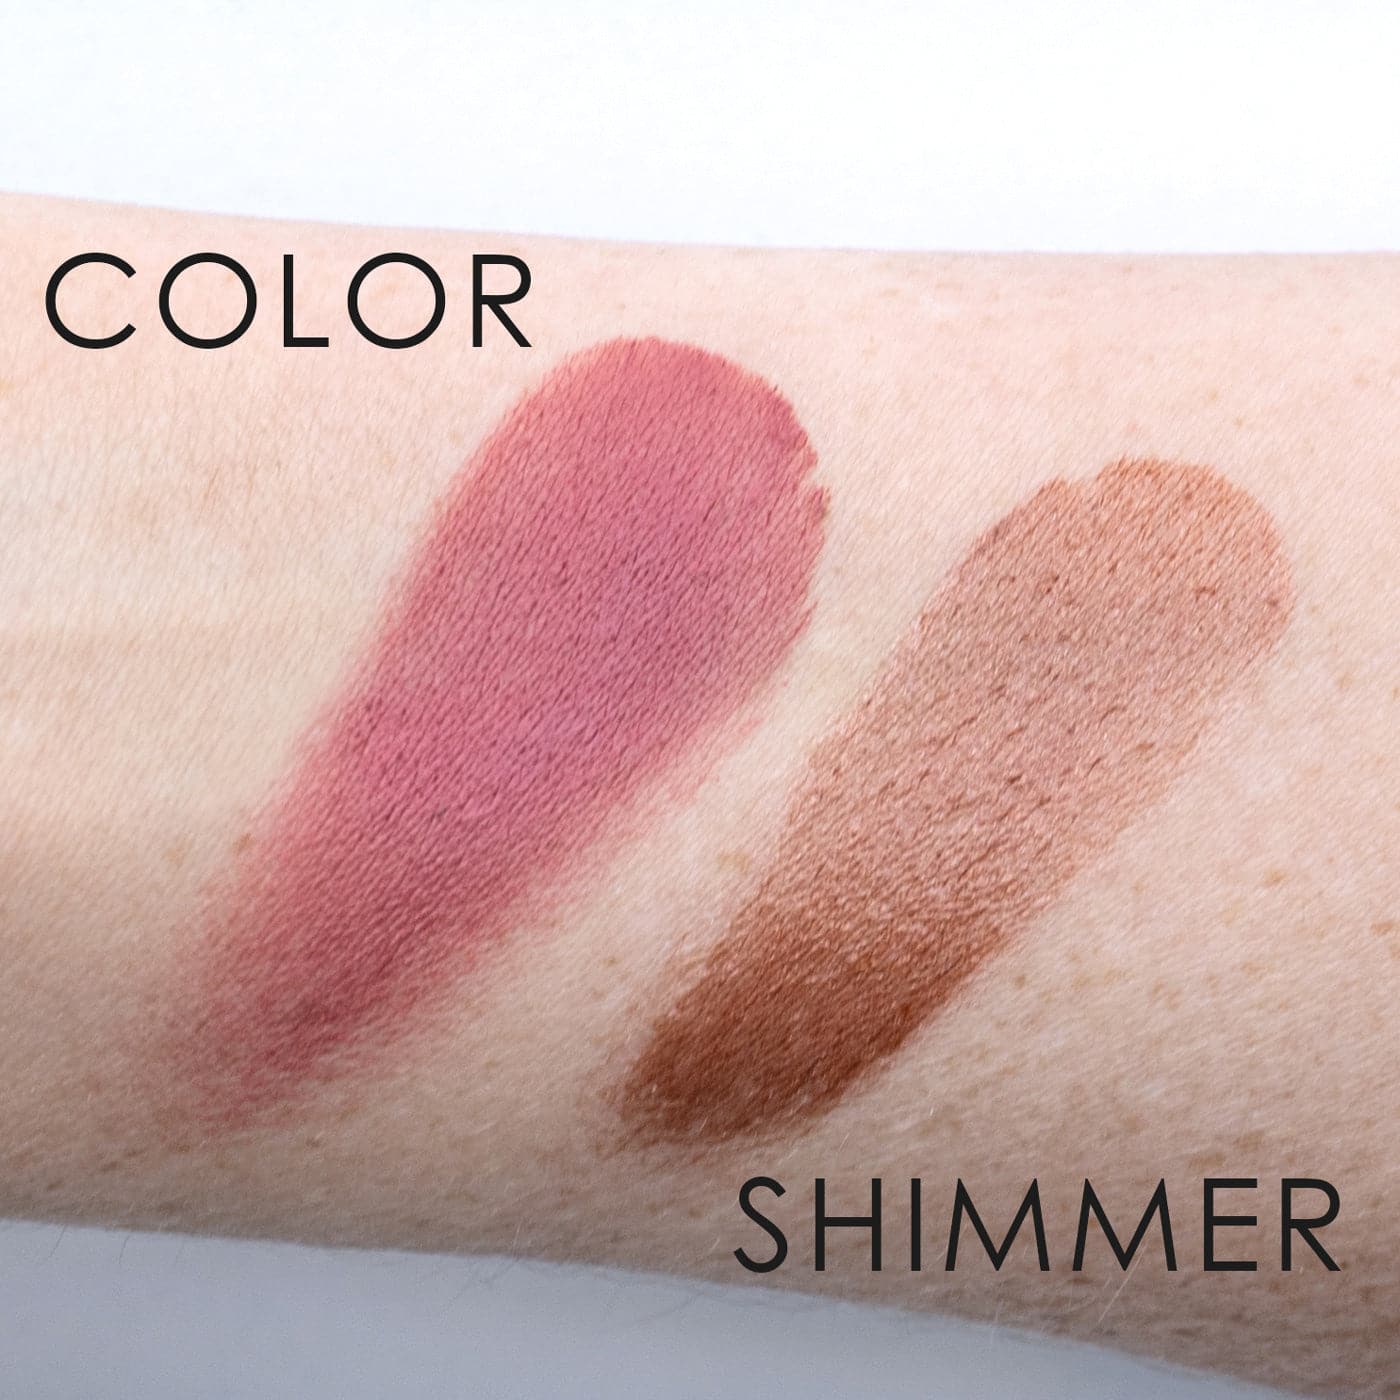 a swatch of the COLOR and the IN YOUR FACE SHIMMER on a pale arm, showing the deep rose tone of the COLOR and the shimmery medium brown color of the SHIMMER.